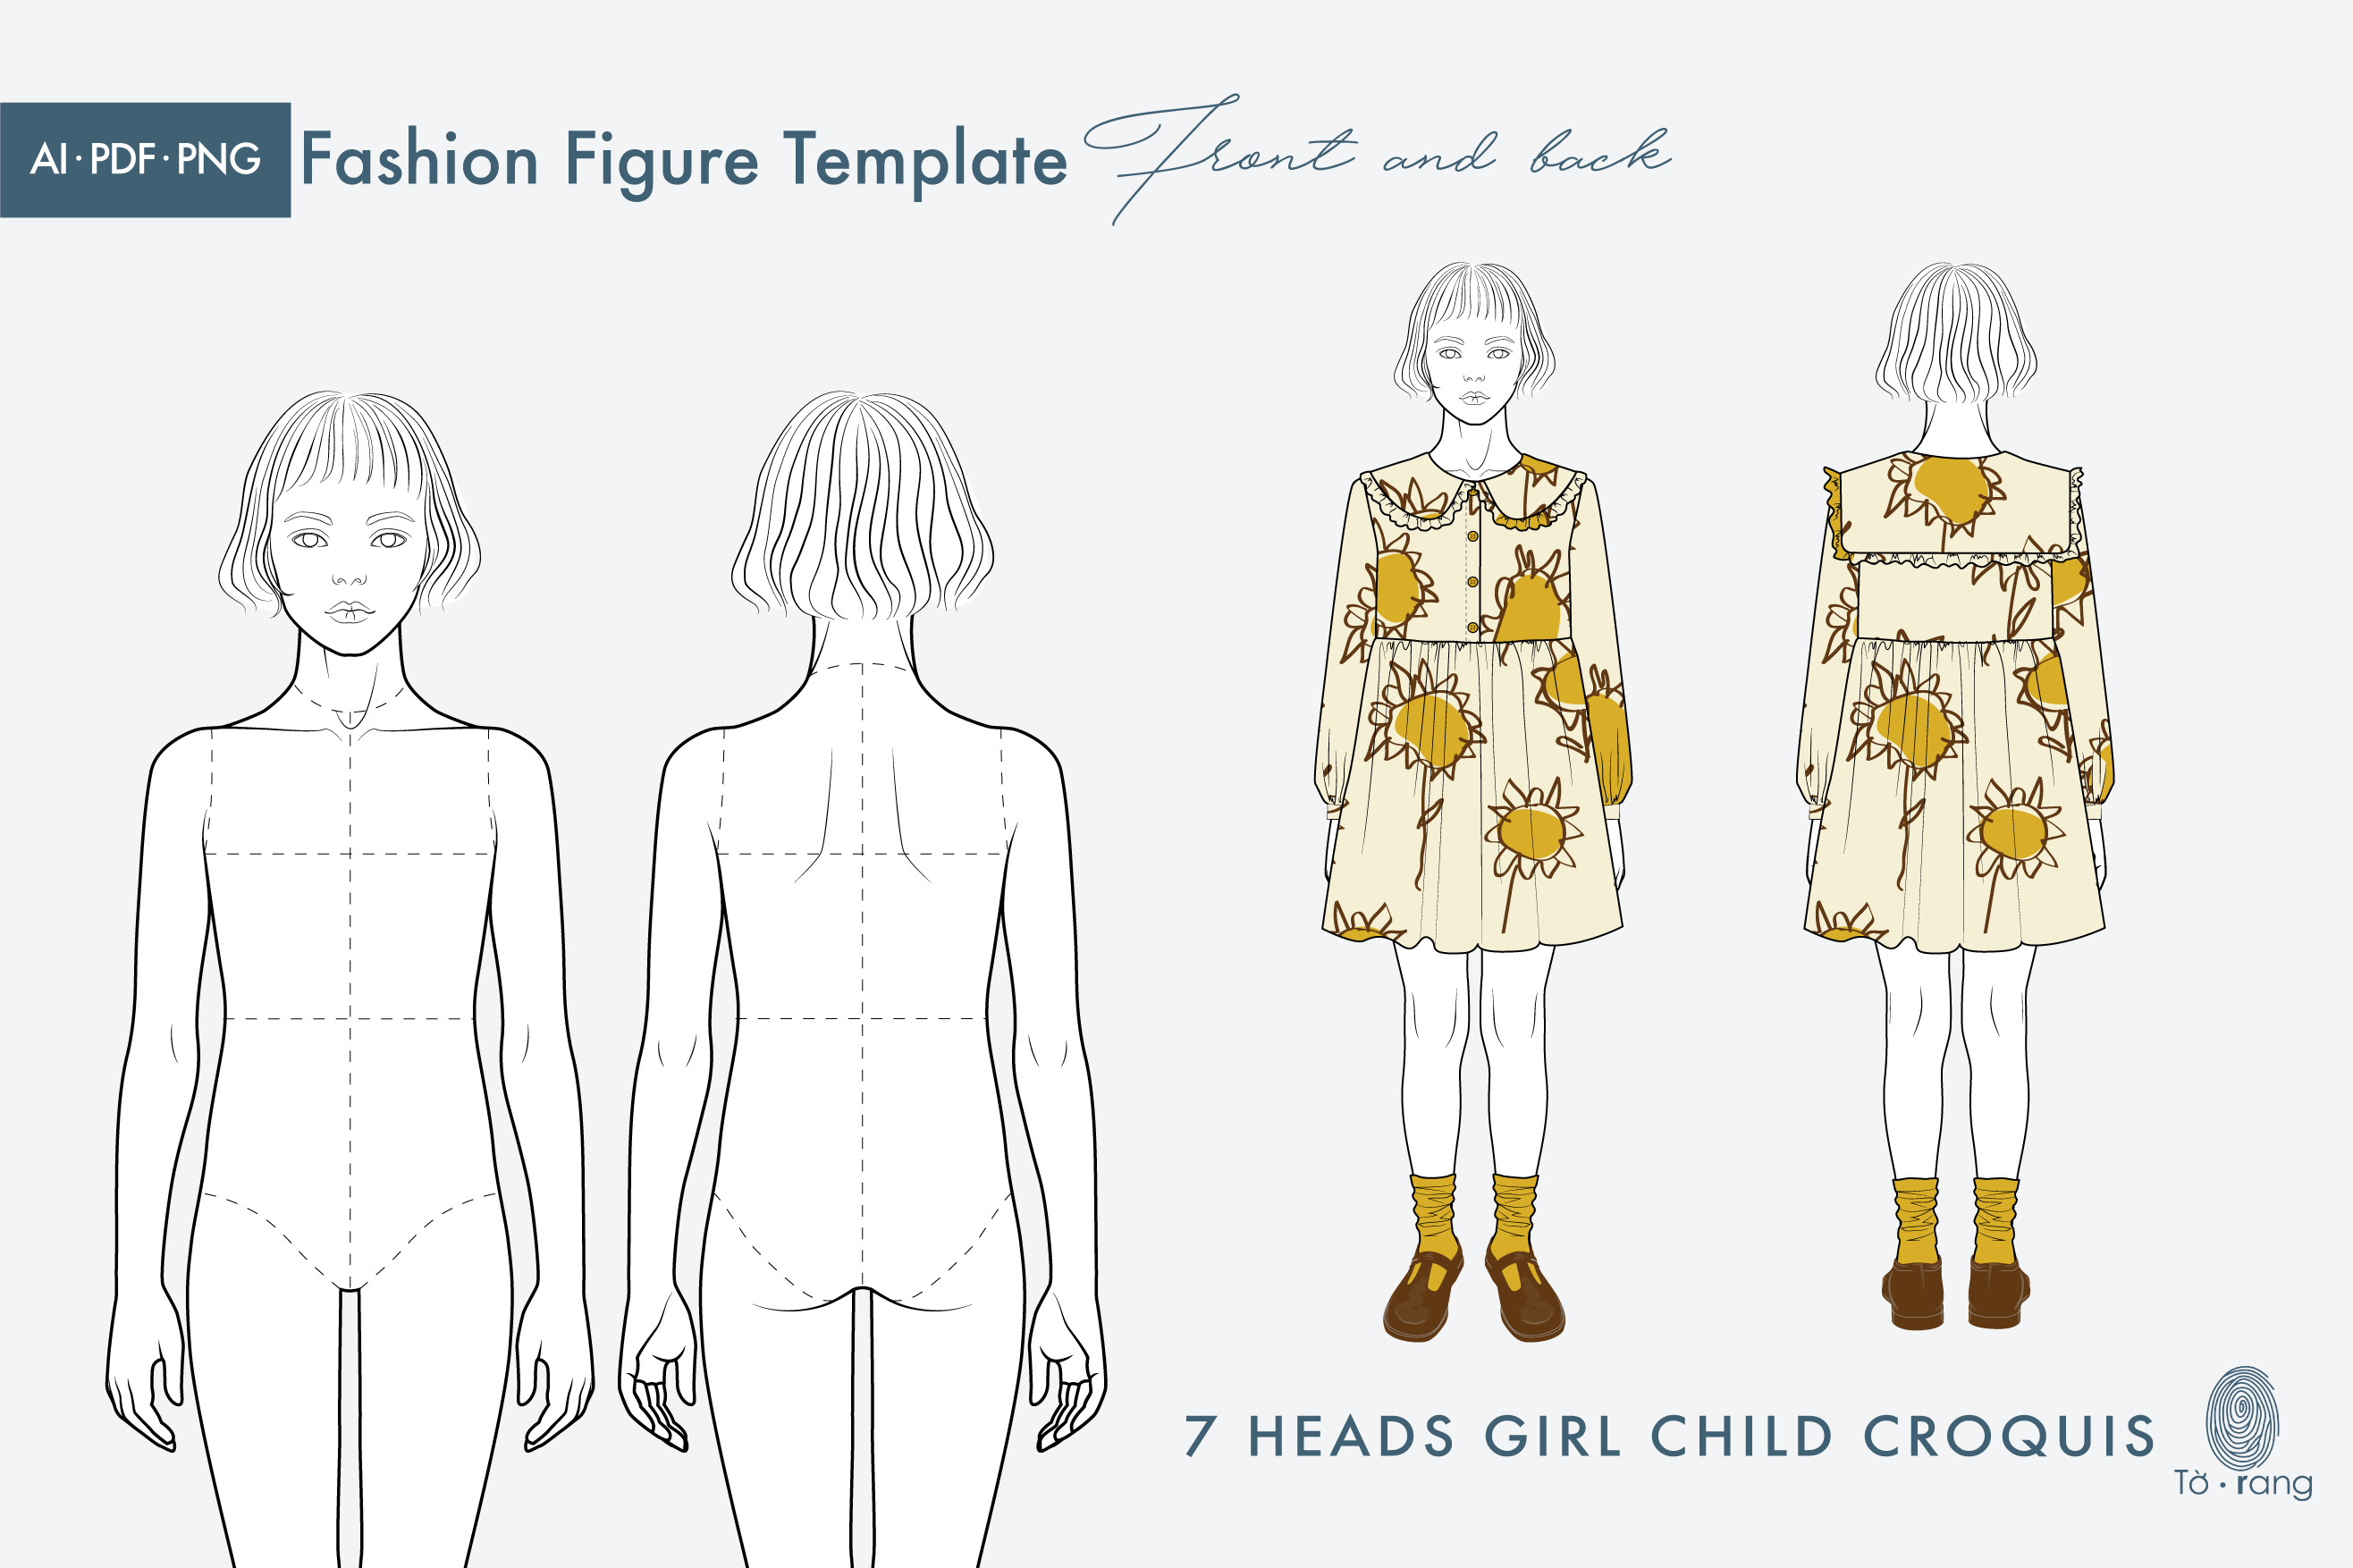 Fashion Sketchbook with Figure Template Graphic by My Creative